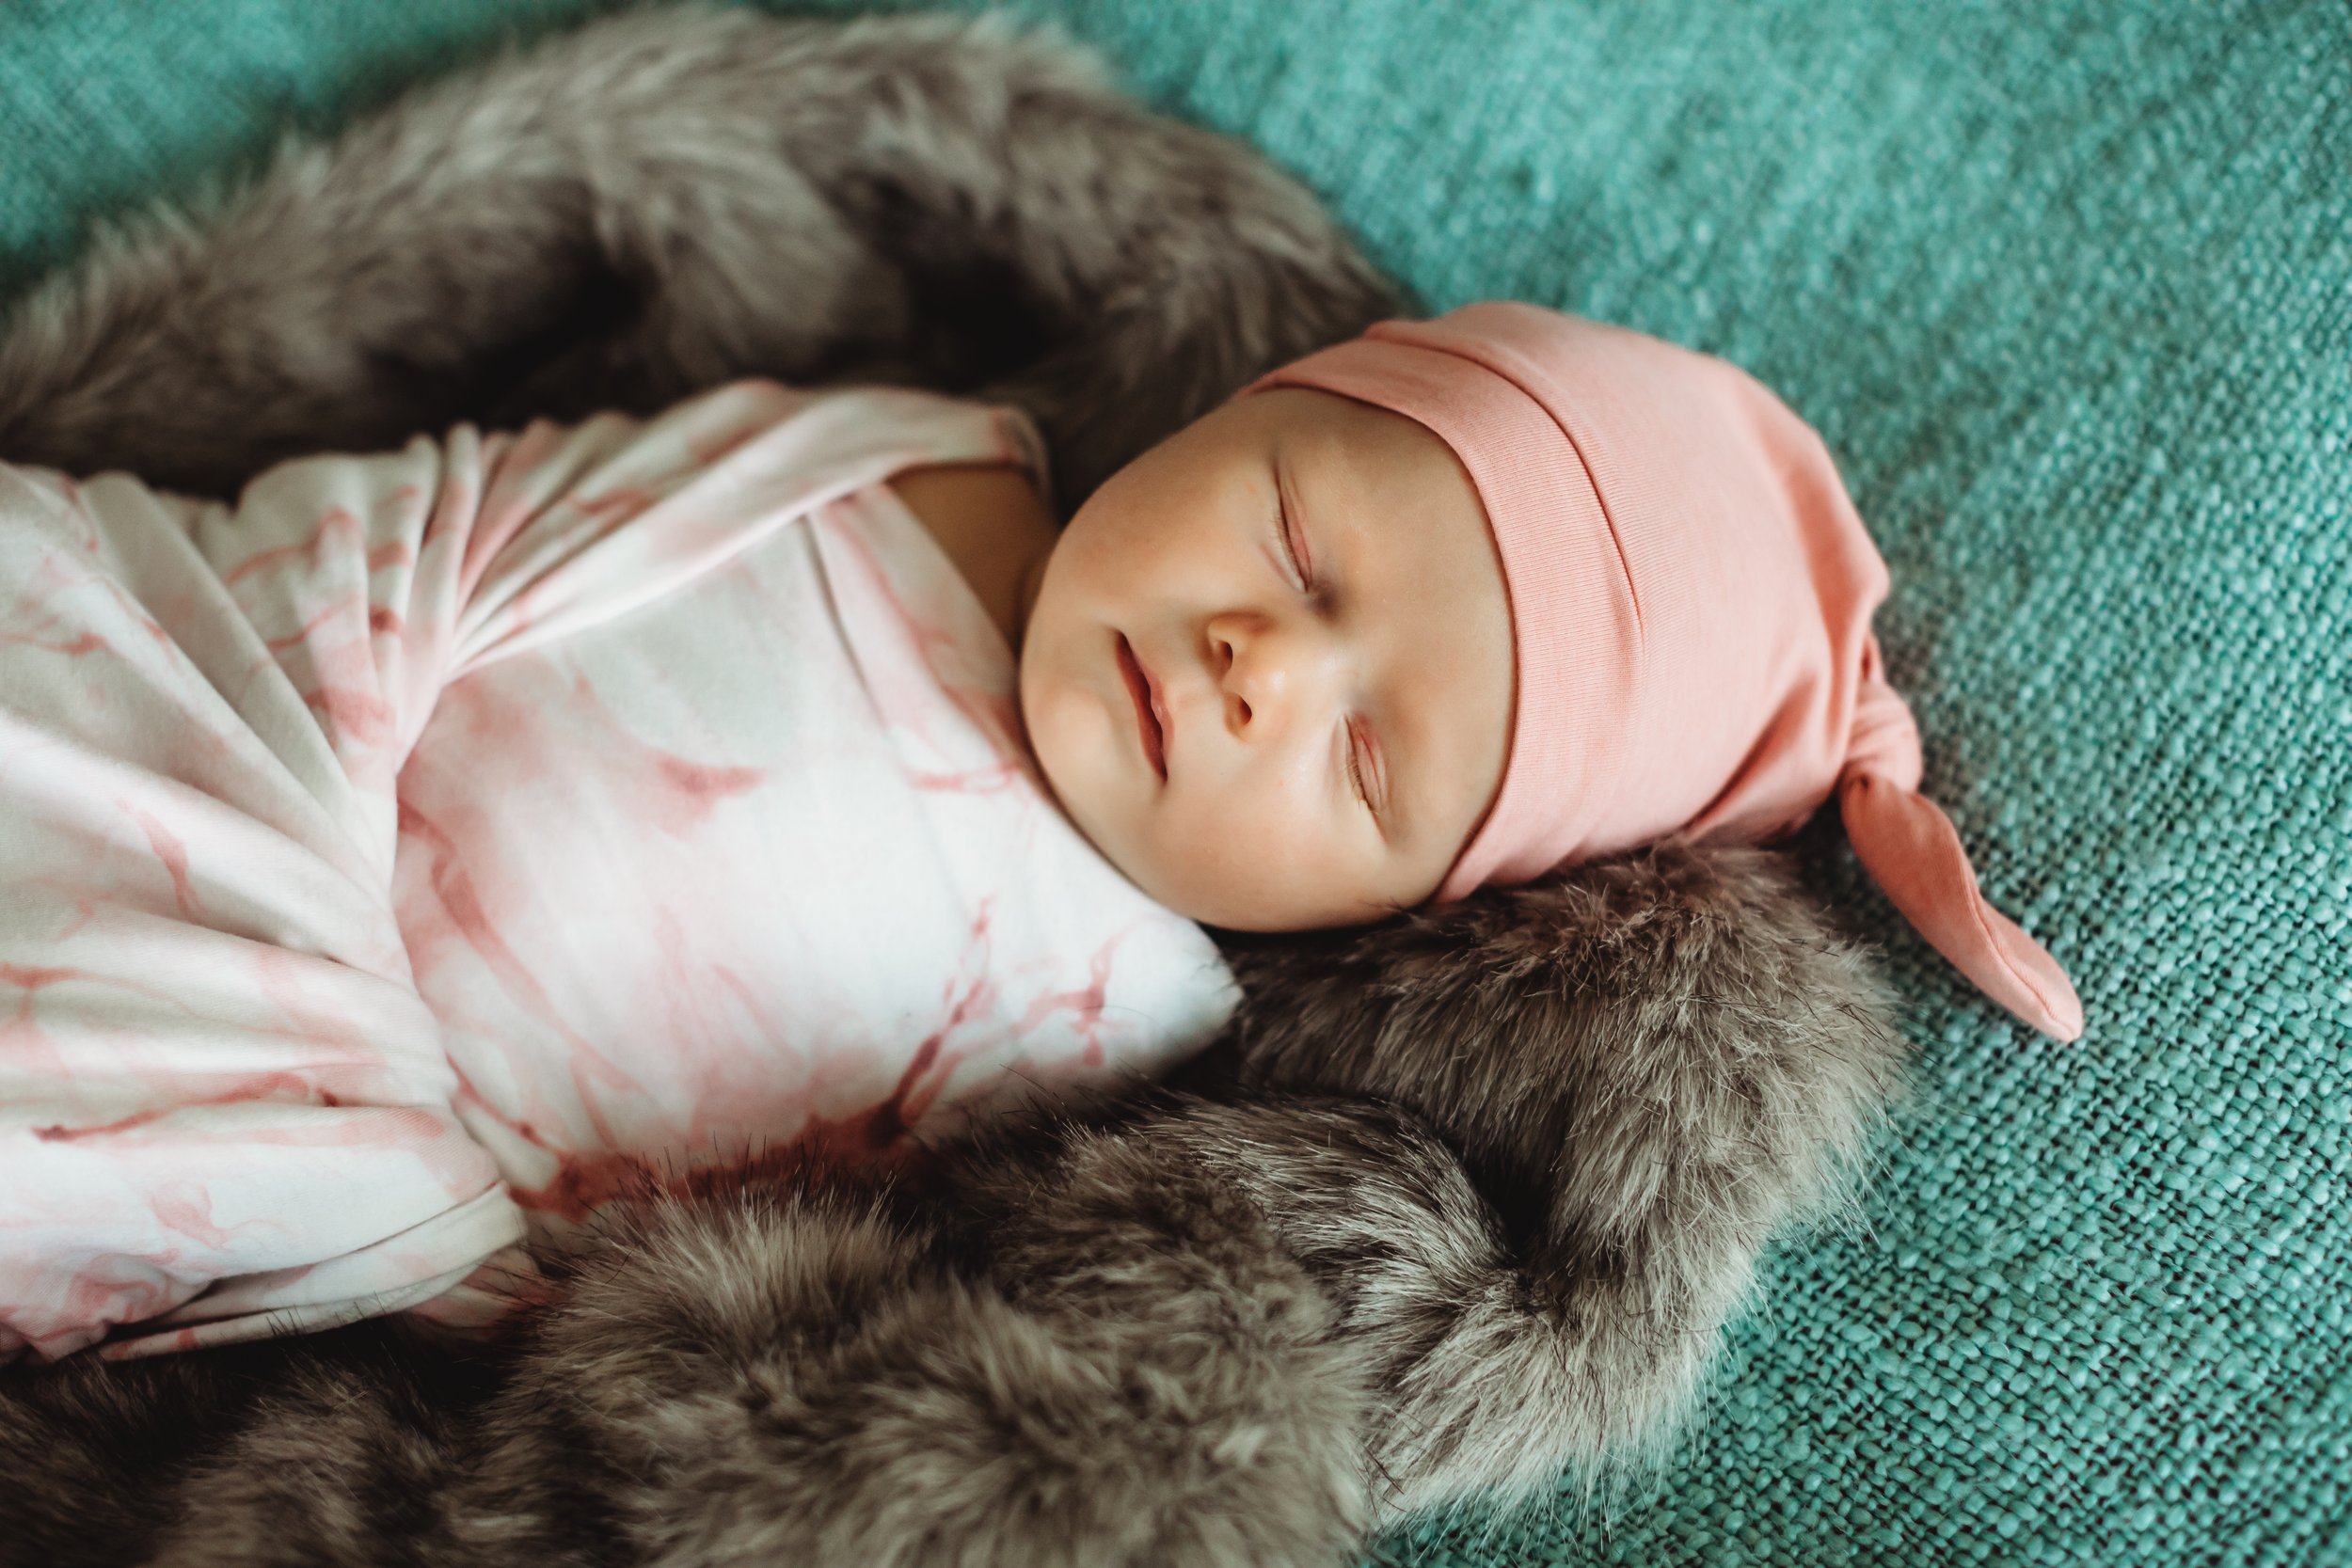  Newborn baby girl swaddled in a pink floral wrap with a pink beanie. fuzzy rug green blanket newborn photos at home Teala Ward Photography in Princeton Illinois #TealaWardPhotography #illinoisphotographer #princetonillinois  